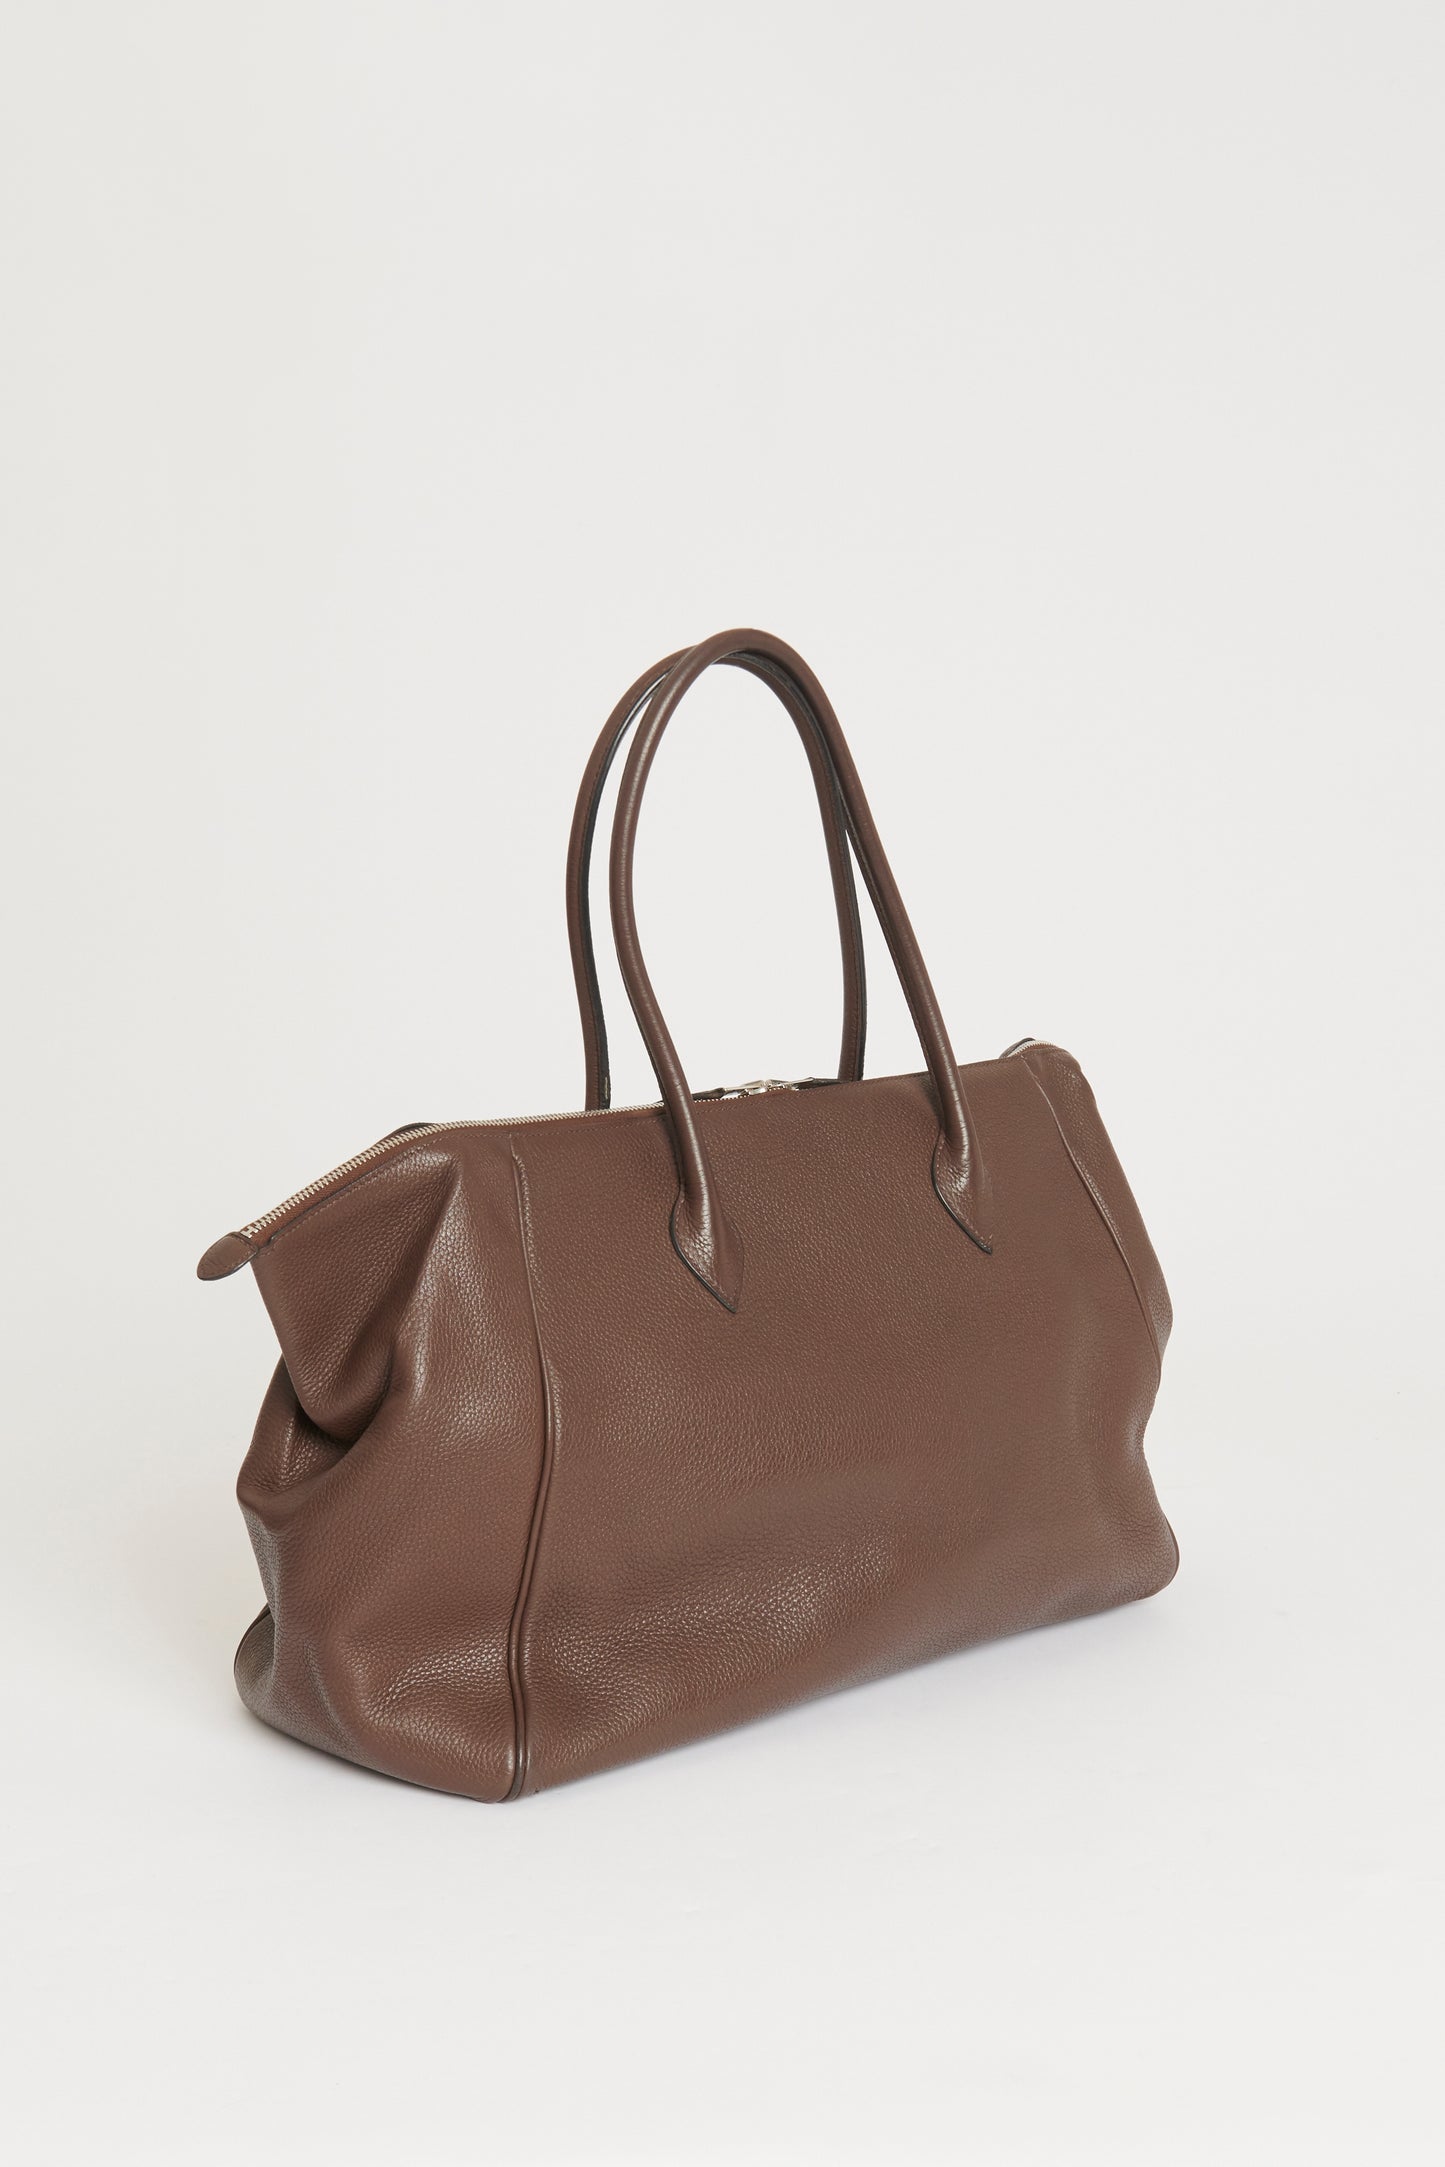 2007 Brown Togo Leather Paris-Bombay Preowned Bag